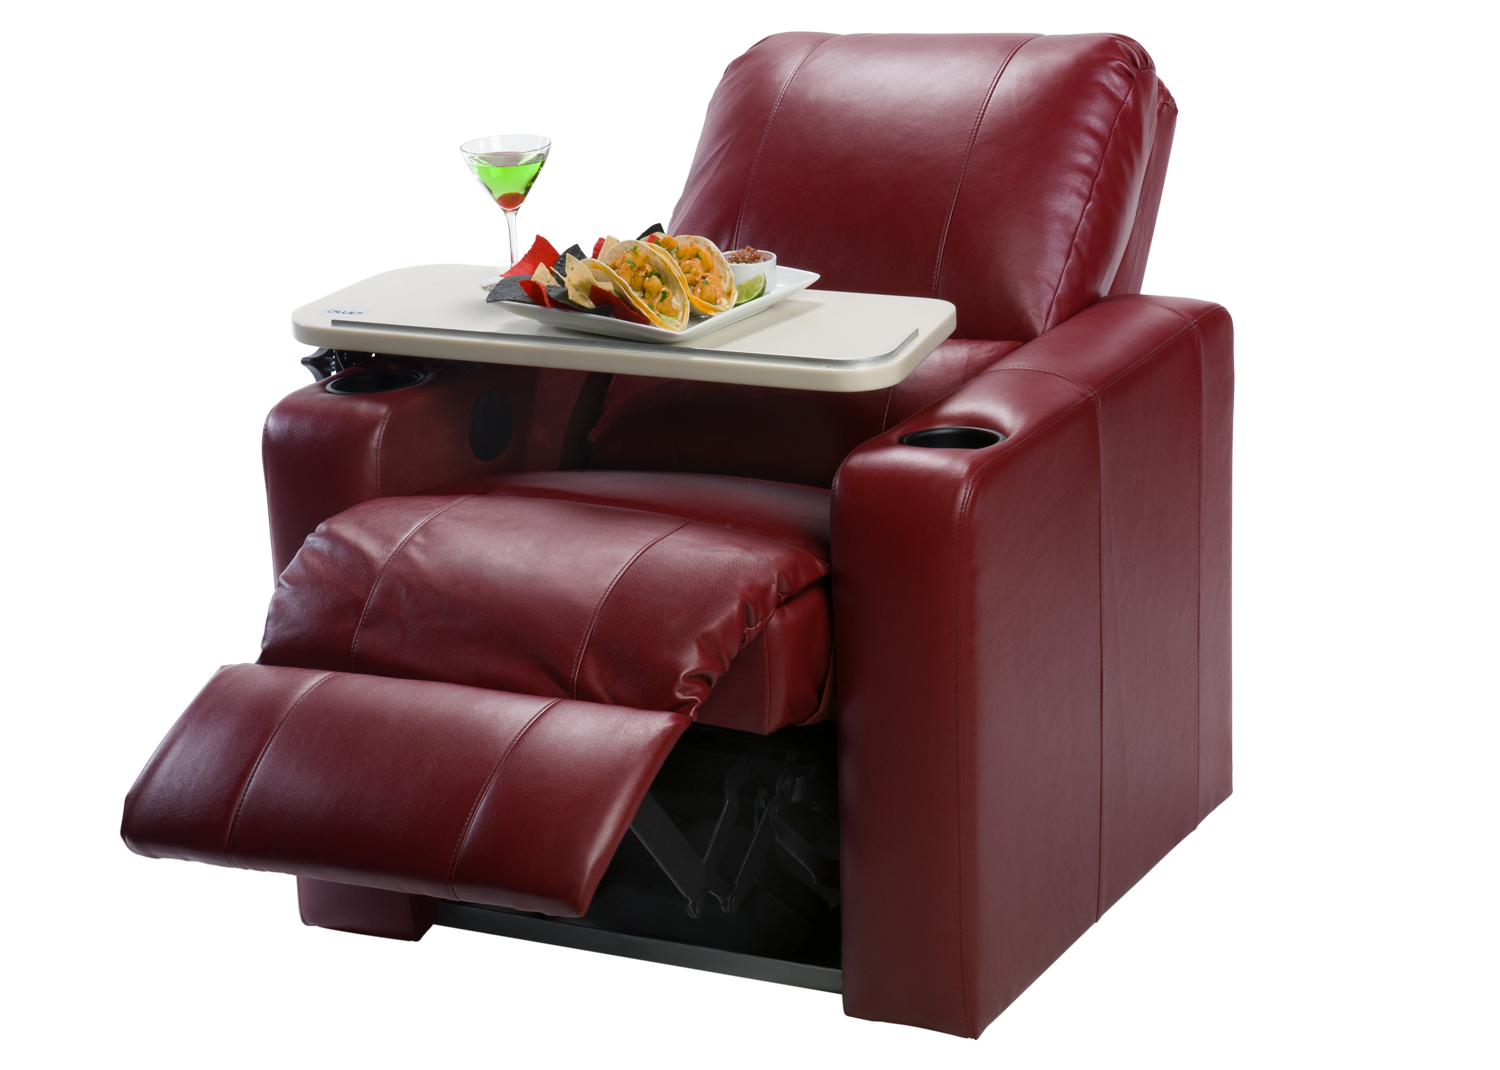 Recliner Seating